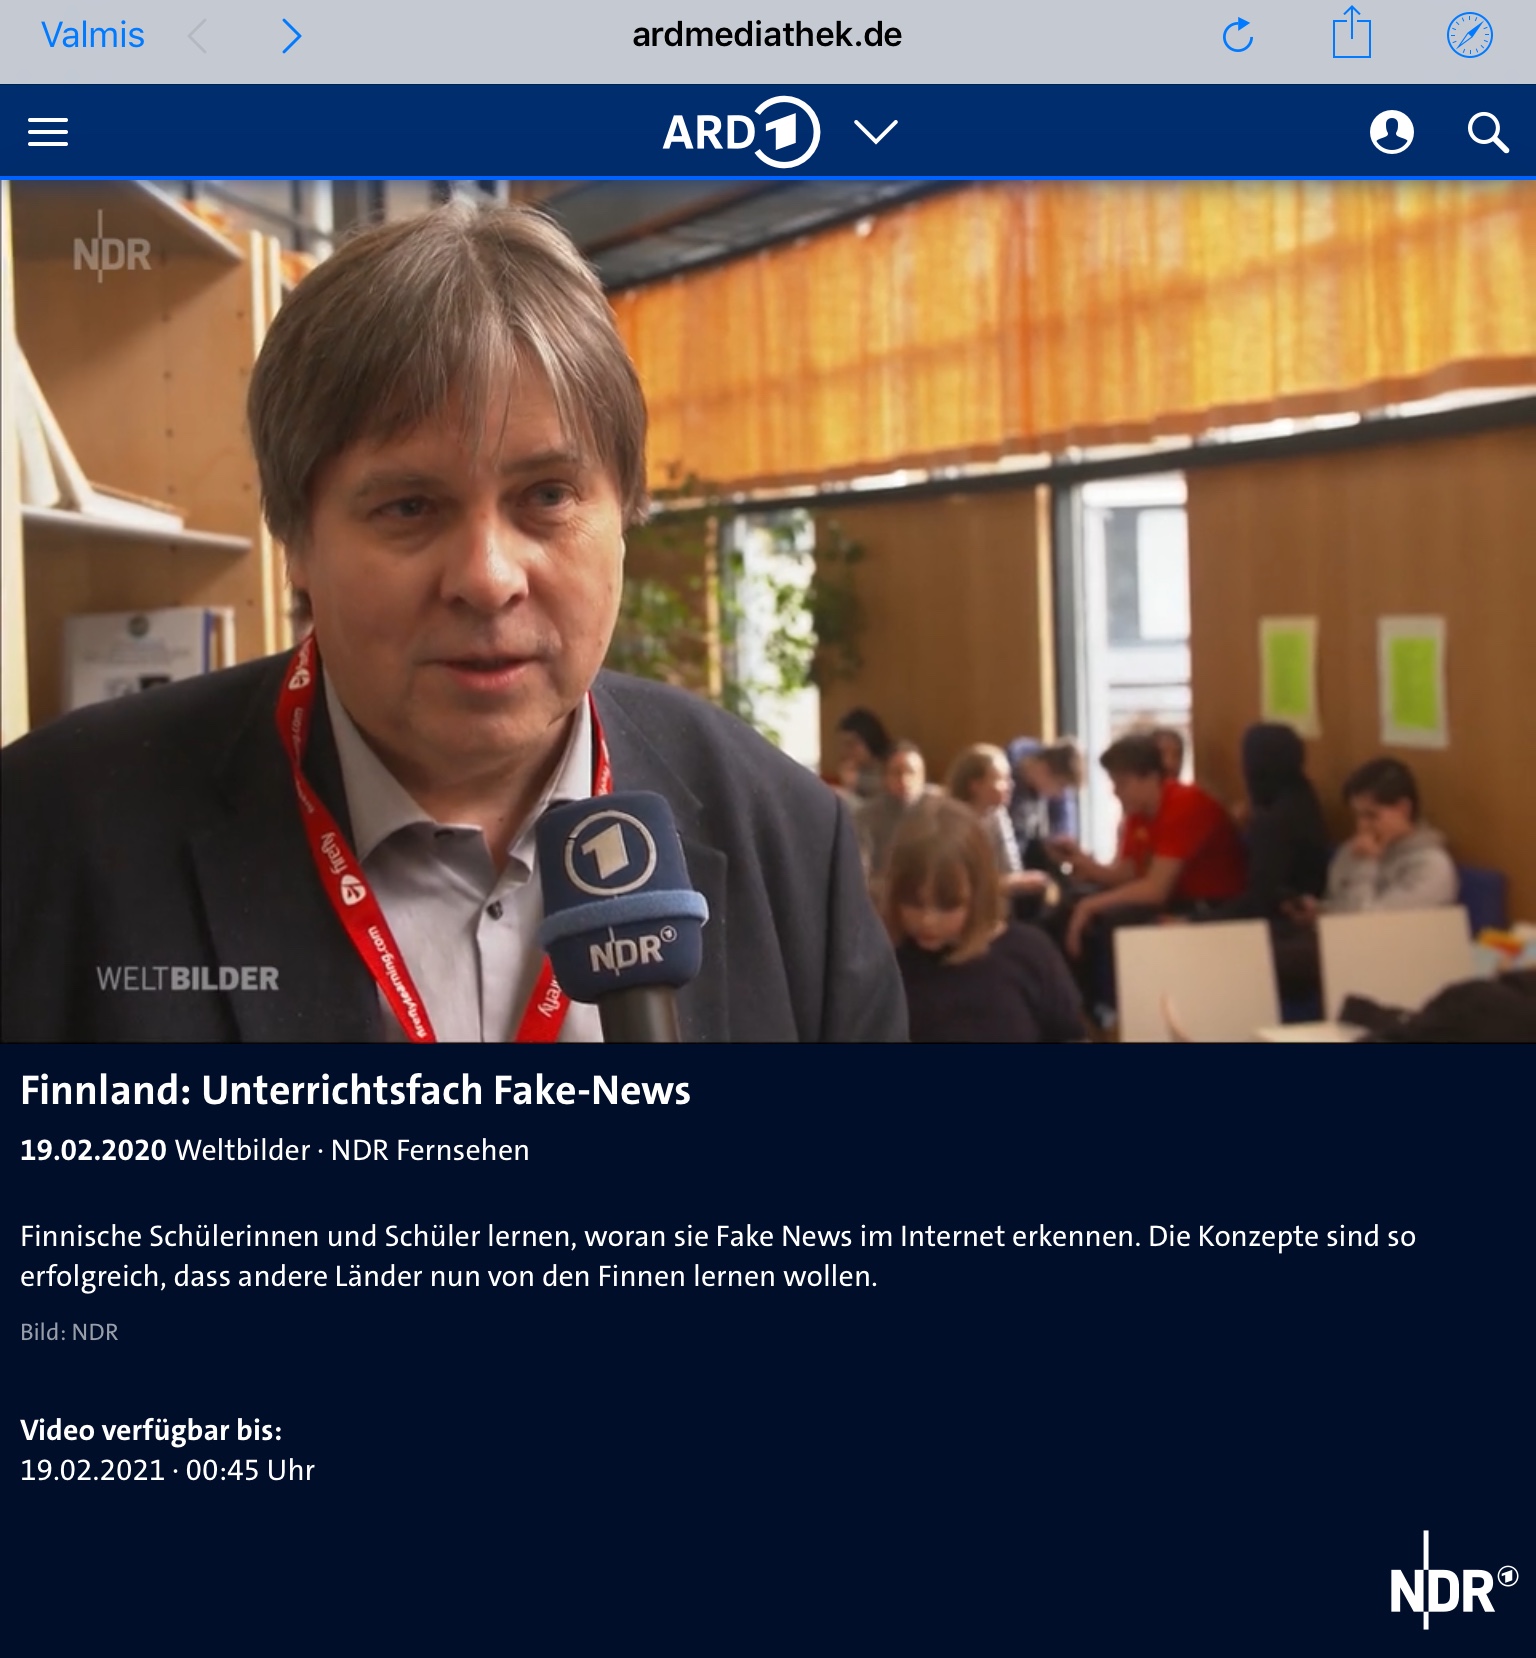 NDR/ARD1 reported about the Finnish media- and information literacy education